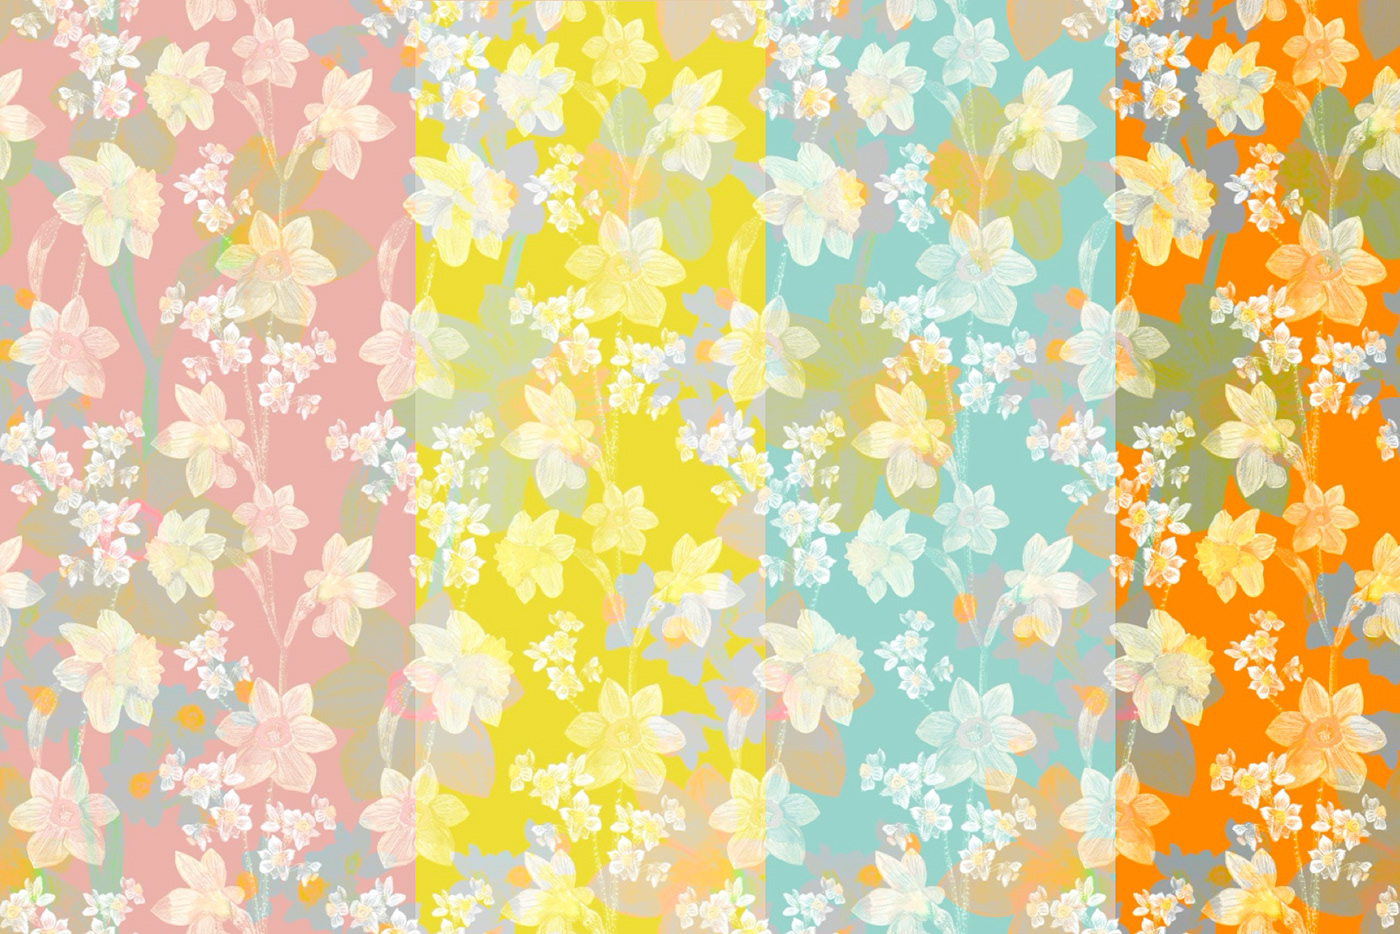 botanical colored pencils design fabric Flowers seamless pattern WILD FLOWERS daffodils spring art